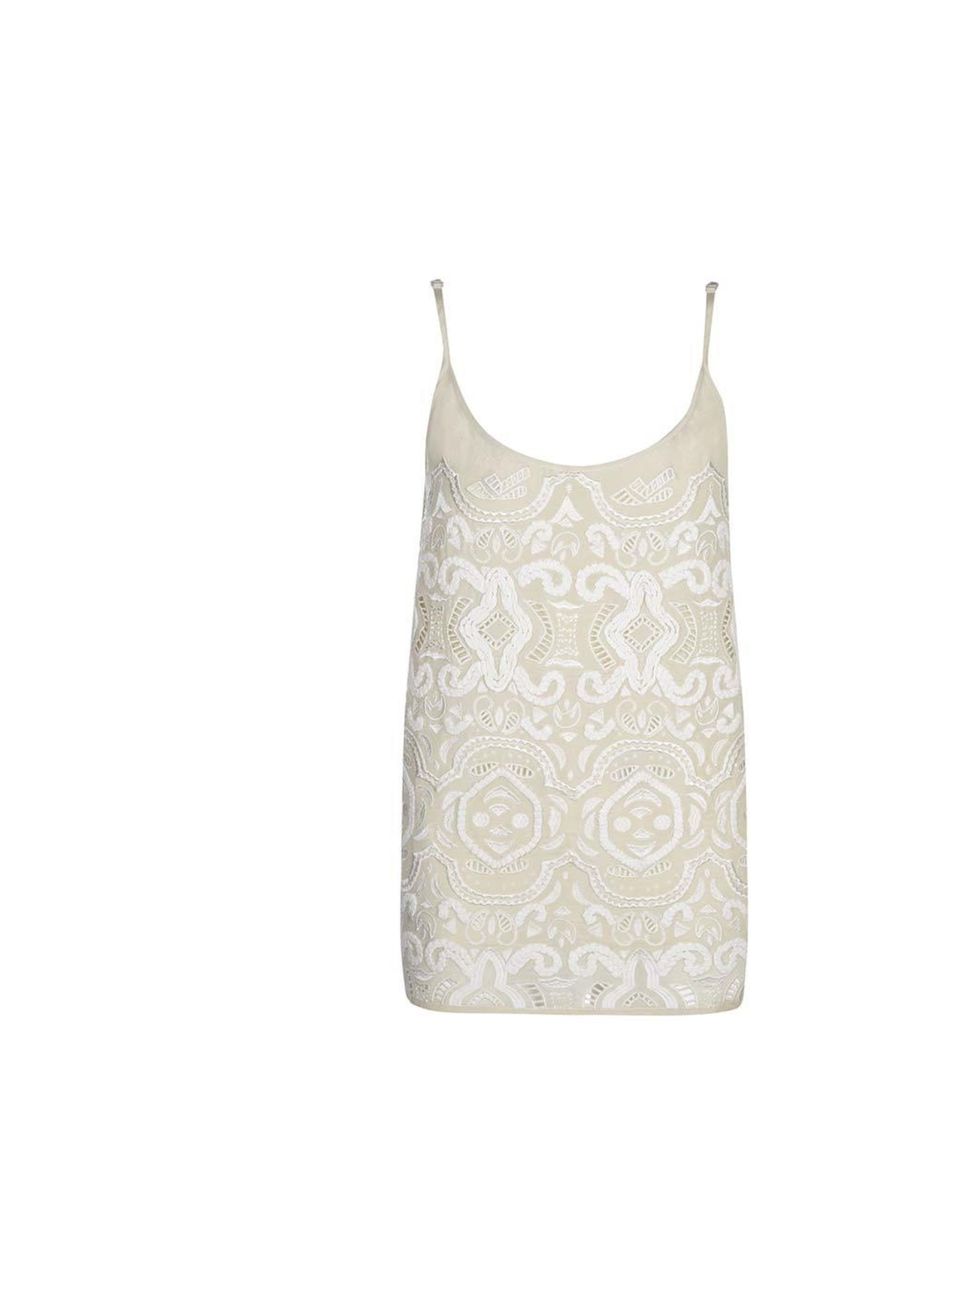 <p>This beautiful silk vest, with its intricate rope embroidery, would be great to wear to a special garden party (with plenty of Pimms). I'd style it with a floaty maxi skirt.</p><p>- Claire Sibbick, Junior Sub-Editor</p><p><a href="http://www.jigsaw-onl